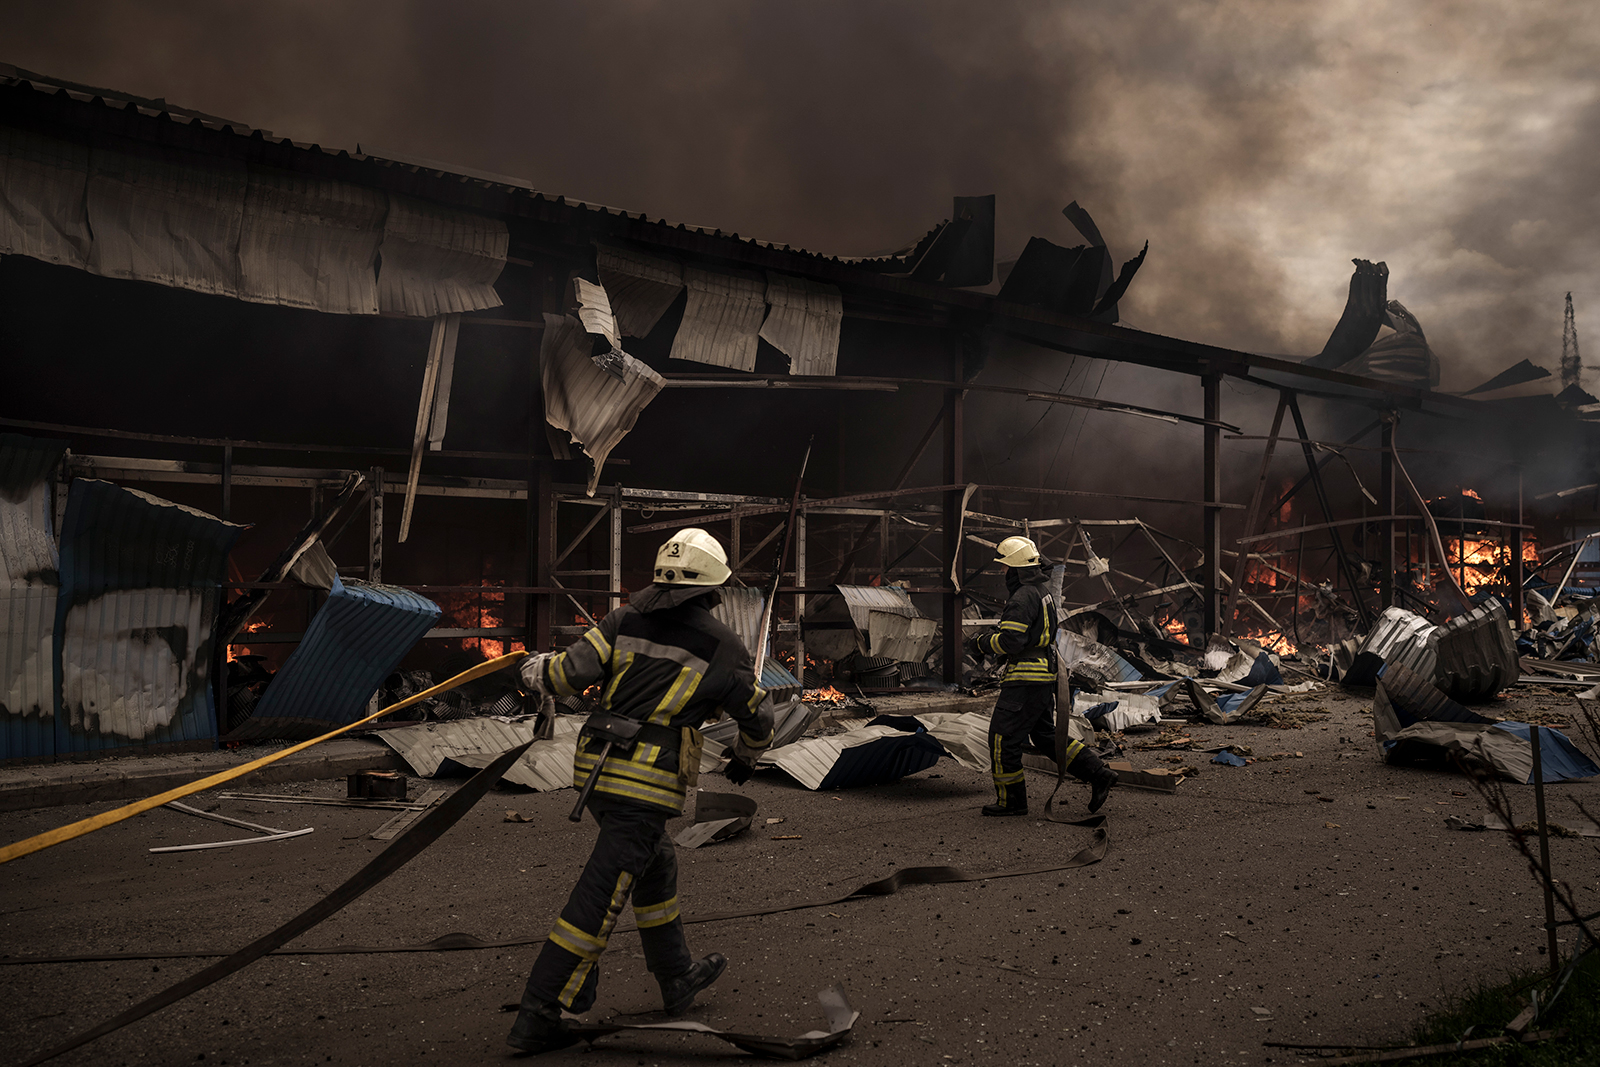 Firefighters work to extinguish a fire on a warehouse amid Russian bombardments in Kharkiv, Ukraine, on Saturday, April 23.